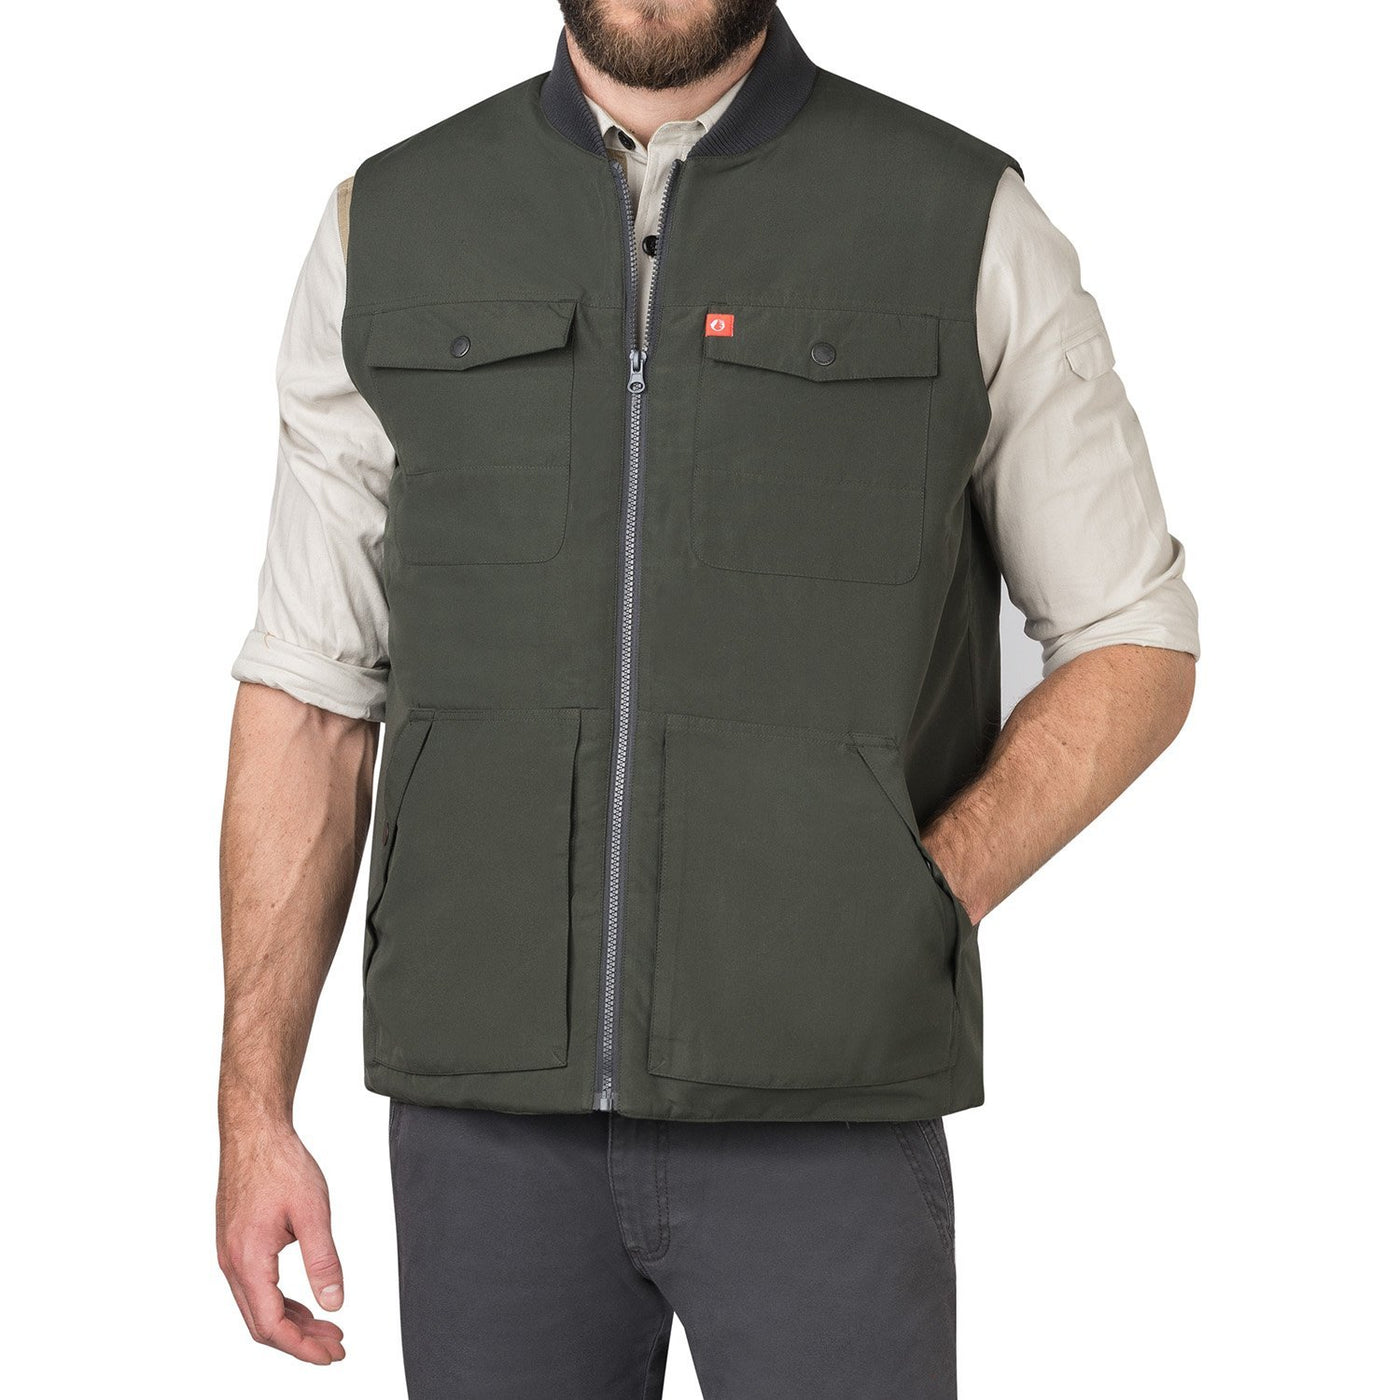 Polyfill Tactical Vest - The American Outdoorsman #color_olive